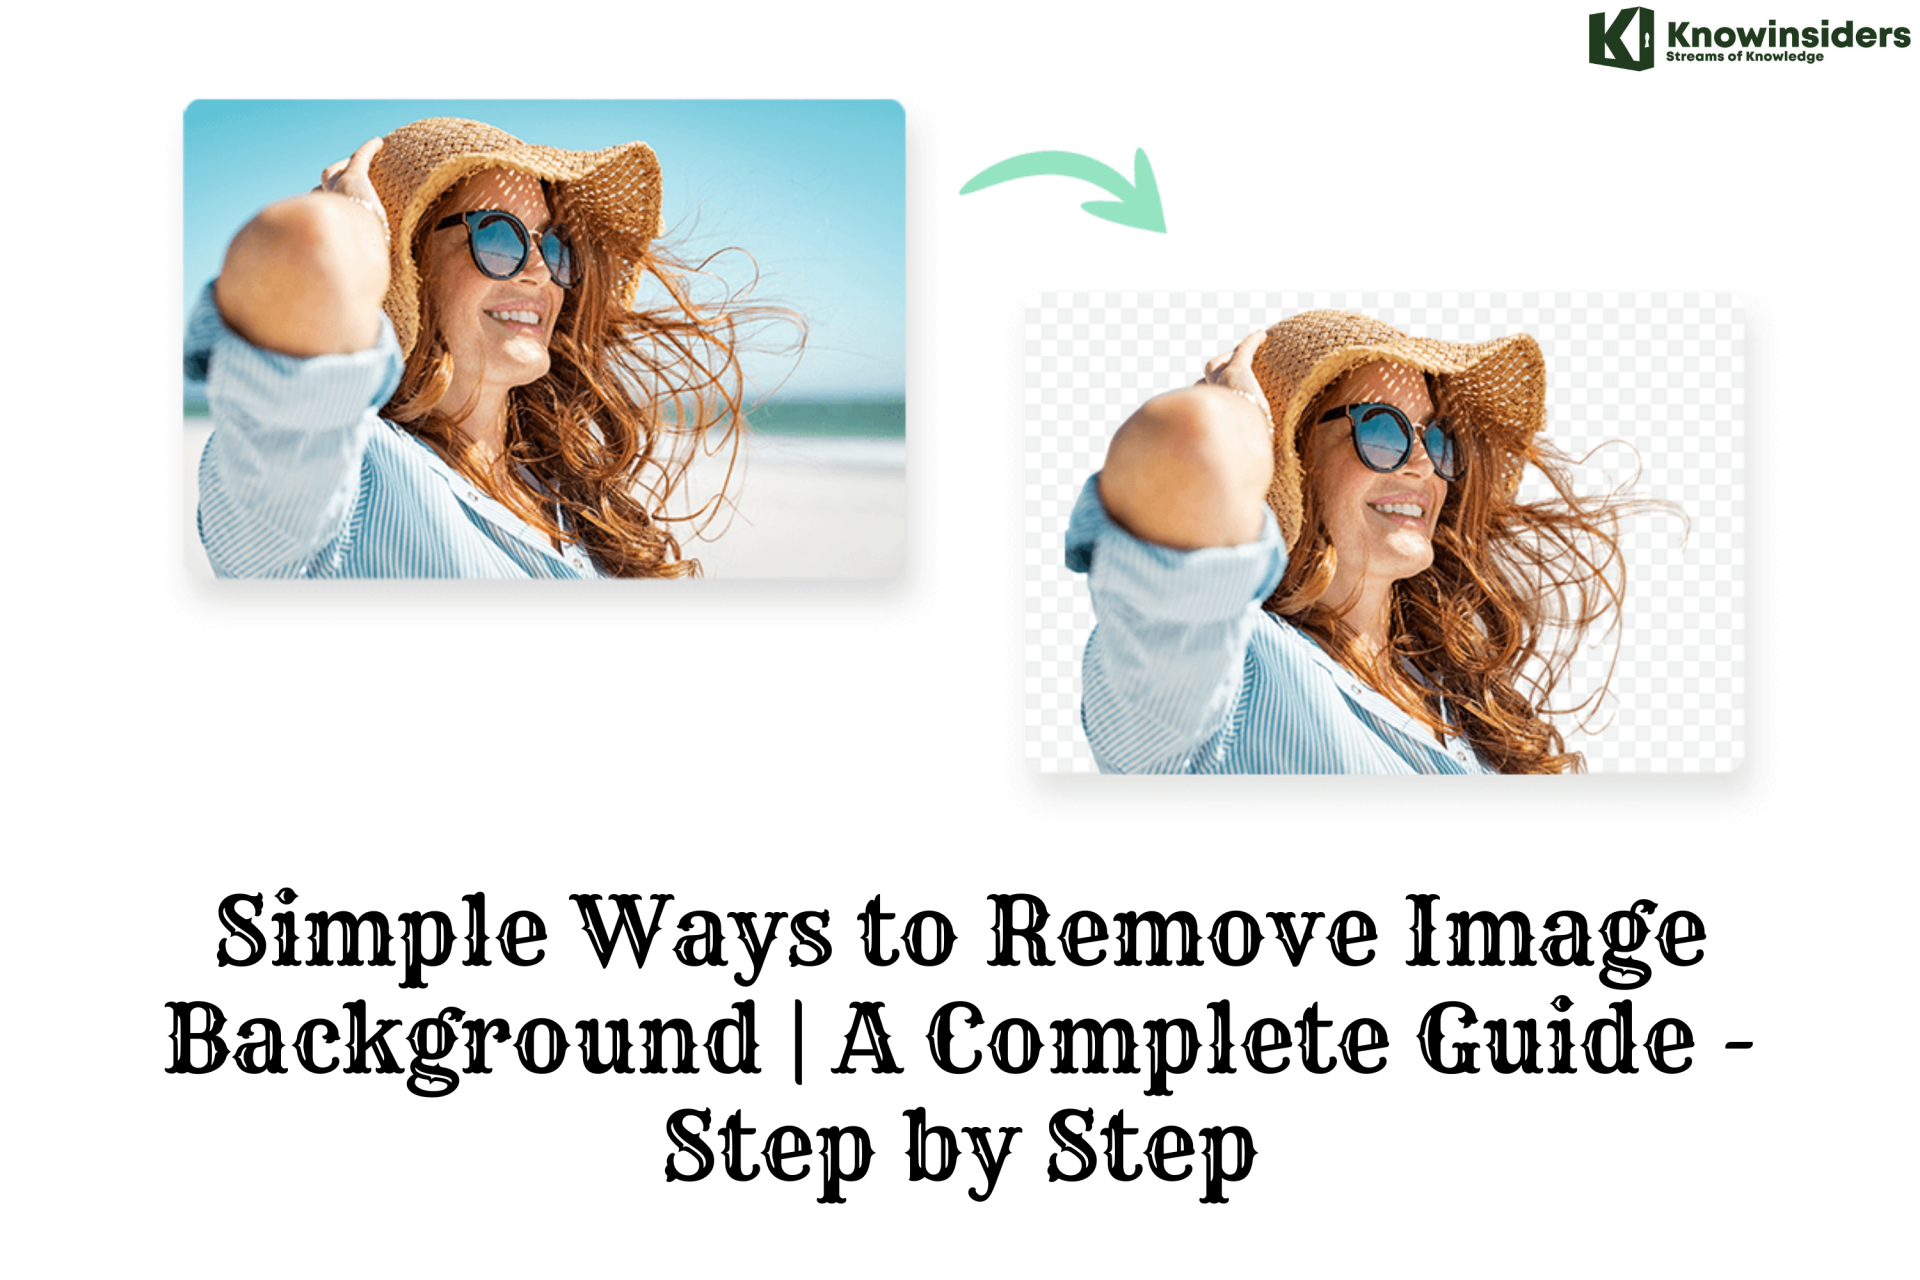 Simple Ways to Remove Image Background | A Complete Guide - Step by Step